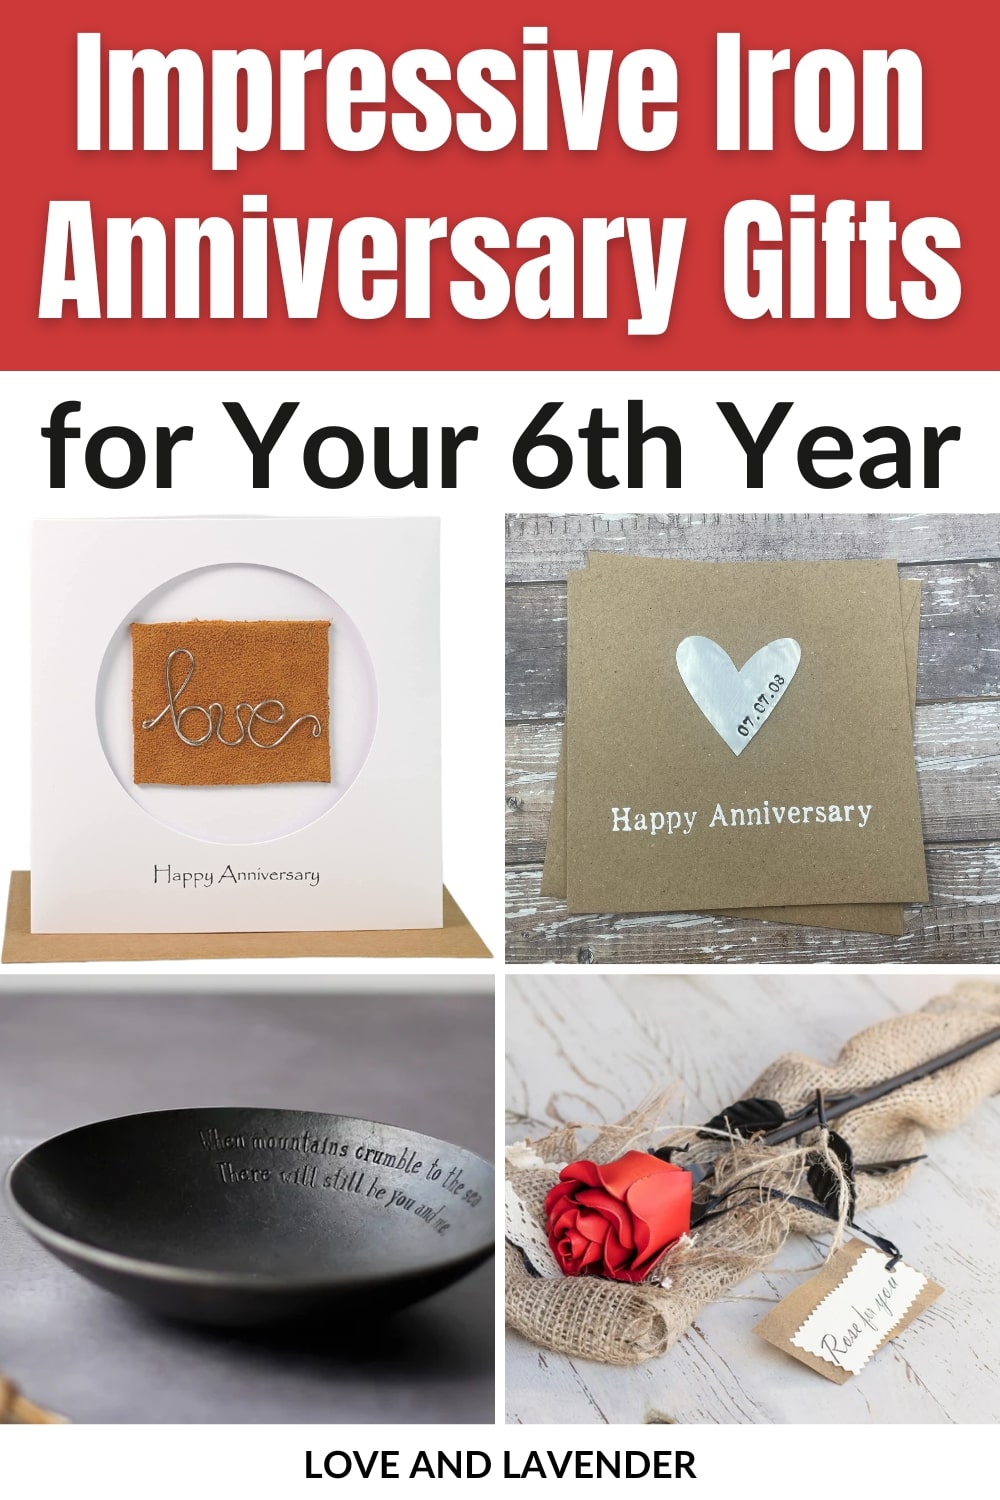 22 Impressive Iron Anniversary Gifts for Your 6th Year